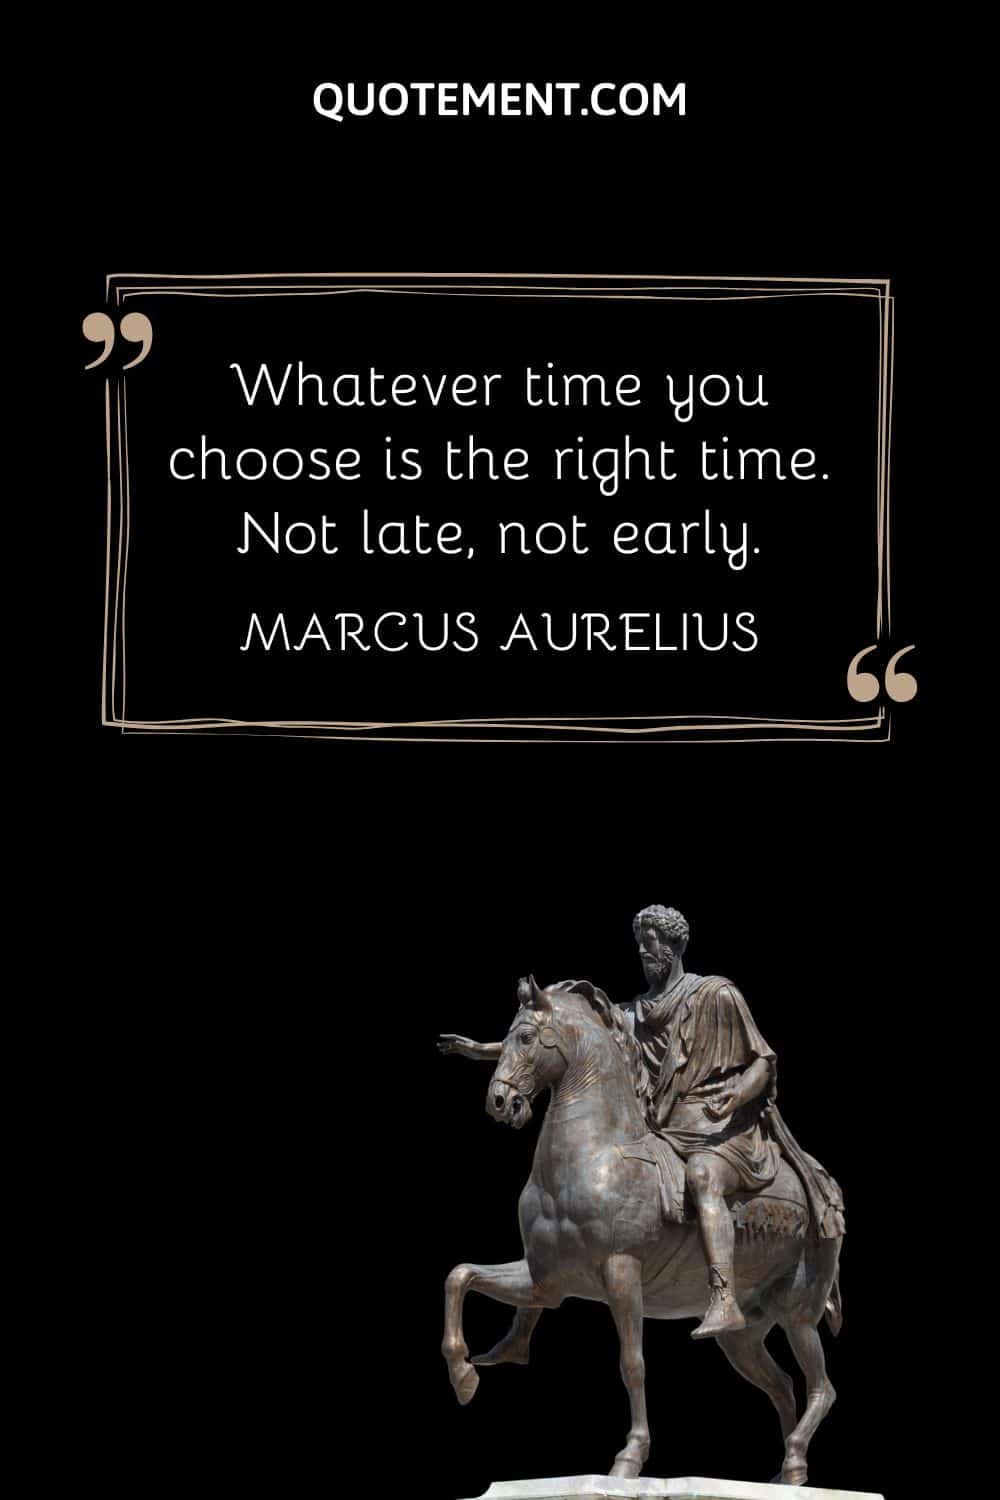 “Whatever time you choose is the right time. Not late, not early.” — Marcus Aurelius